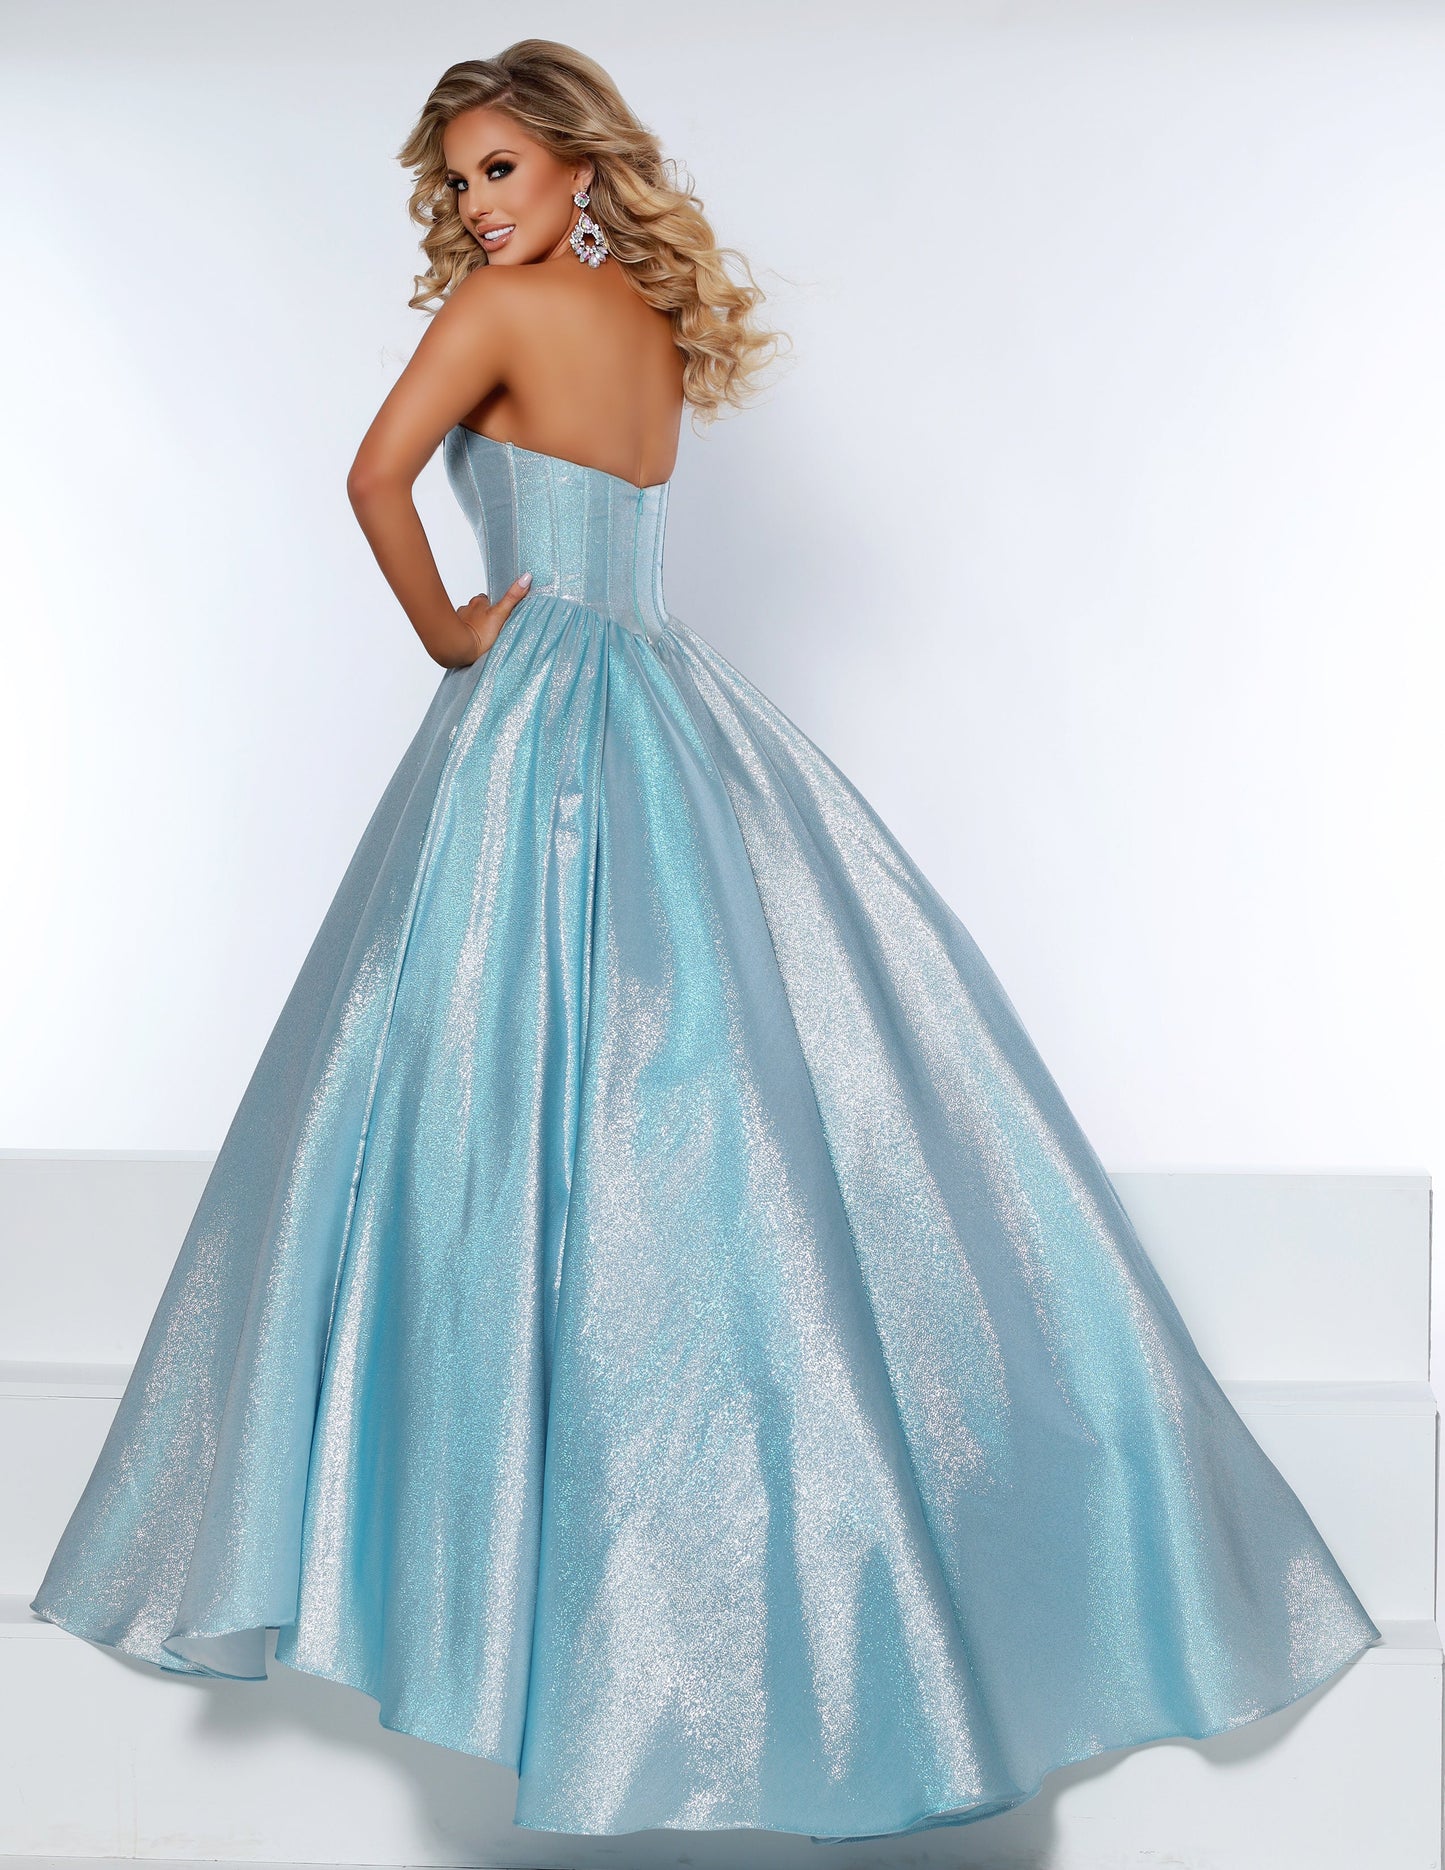 Johnathan Kayne 2411 Long A Line Ballgown Corset Prom Dress Shimmer Formal gown  Available Sizes: 0-18  Available Colors: Aqua/Silver, Pink/Gold, Raspberry